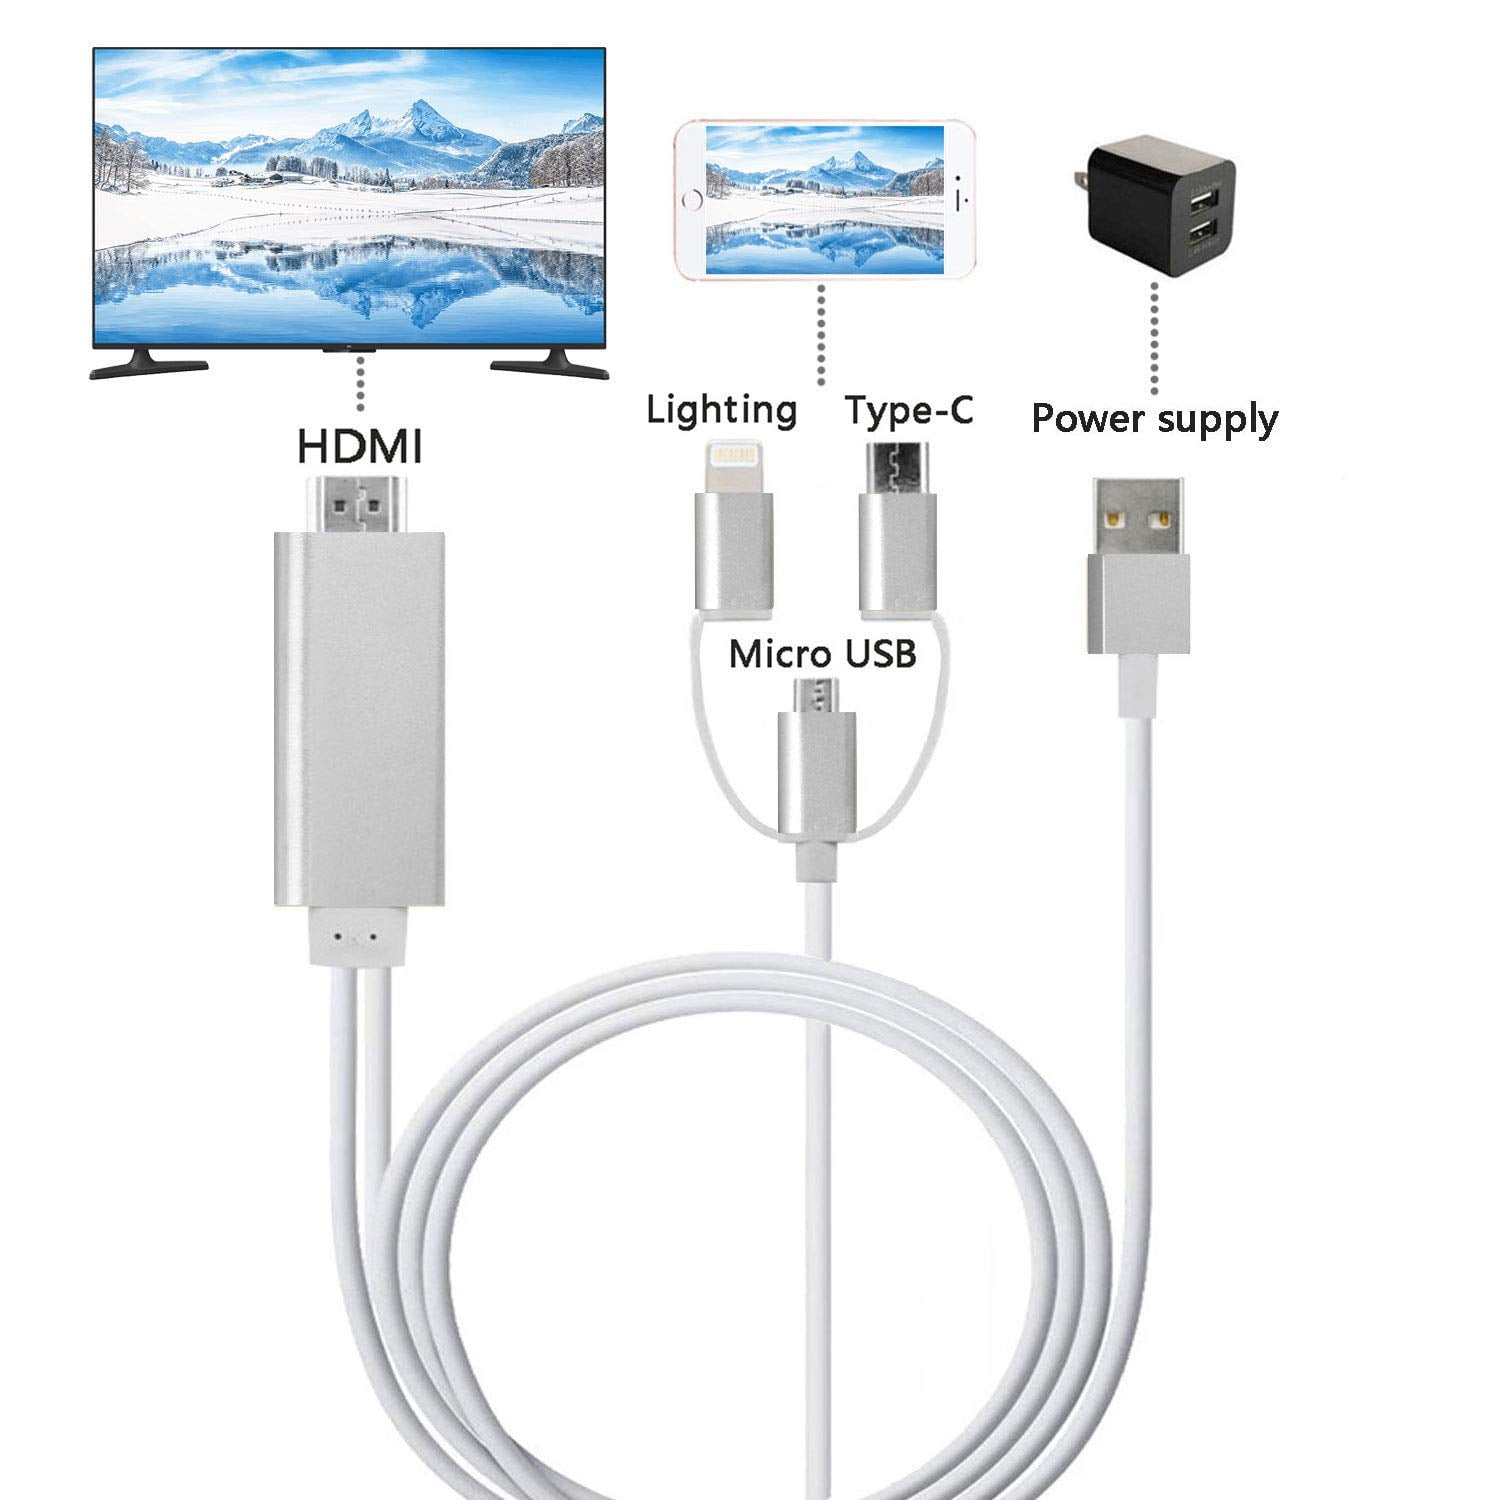 3 in 1 Lighting/Micro USB/Type-C to HDMI Cable, Digital Audio Mirror Mobile Phone Screen to TV Projector Monitor 1080P for iOS and Android (Silver) - Walmart.com